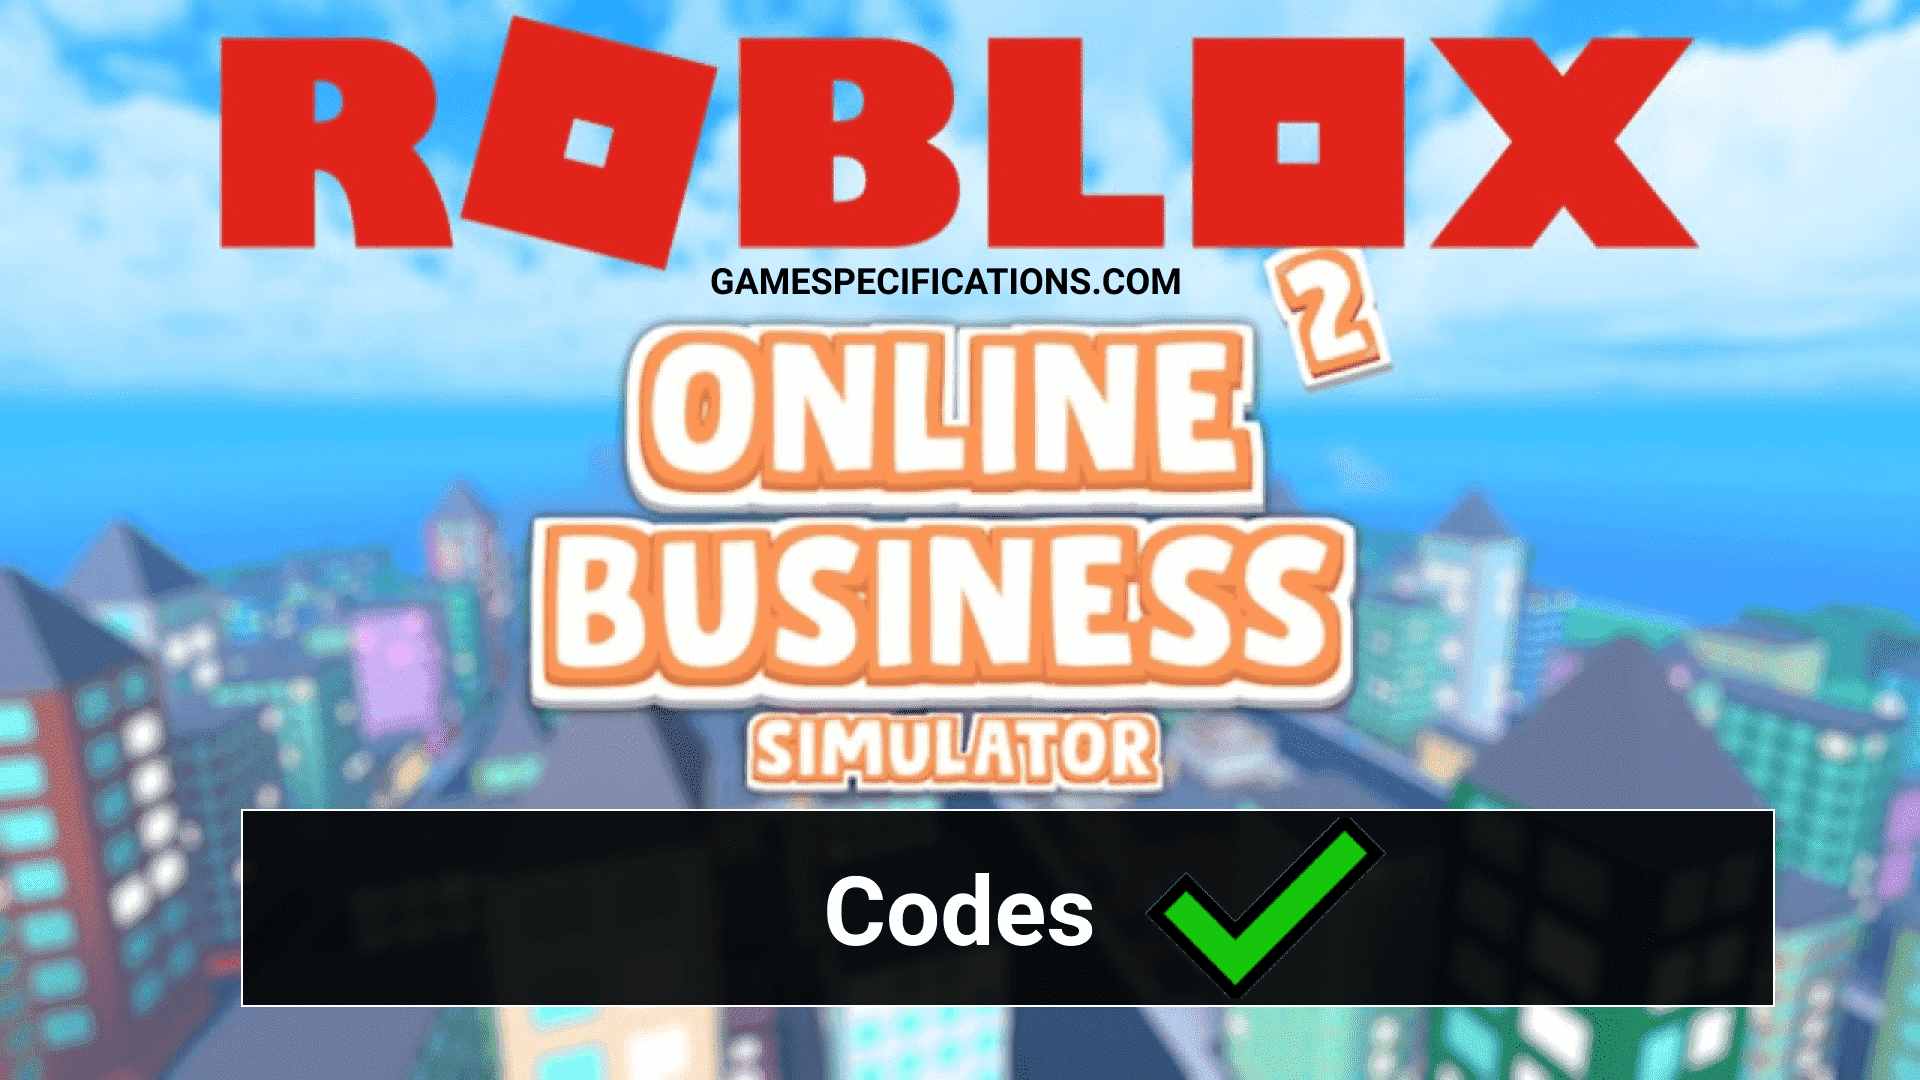 Roblox Business Simulator 2 Codes July 2021 Game Specifications - codes for nuclear plant tycoon roblox